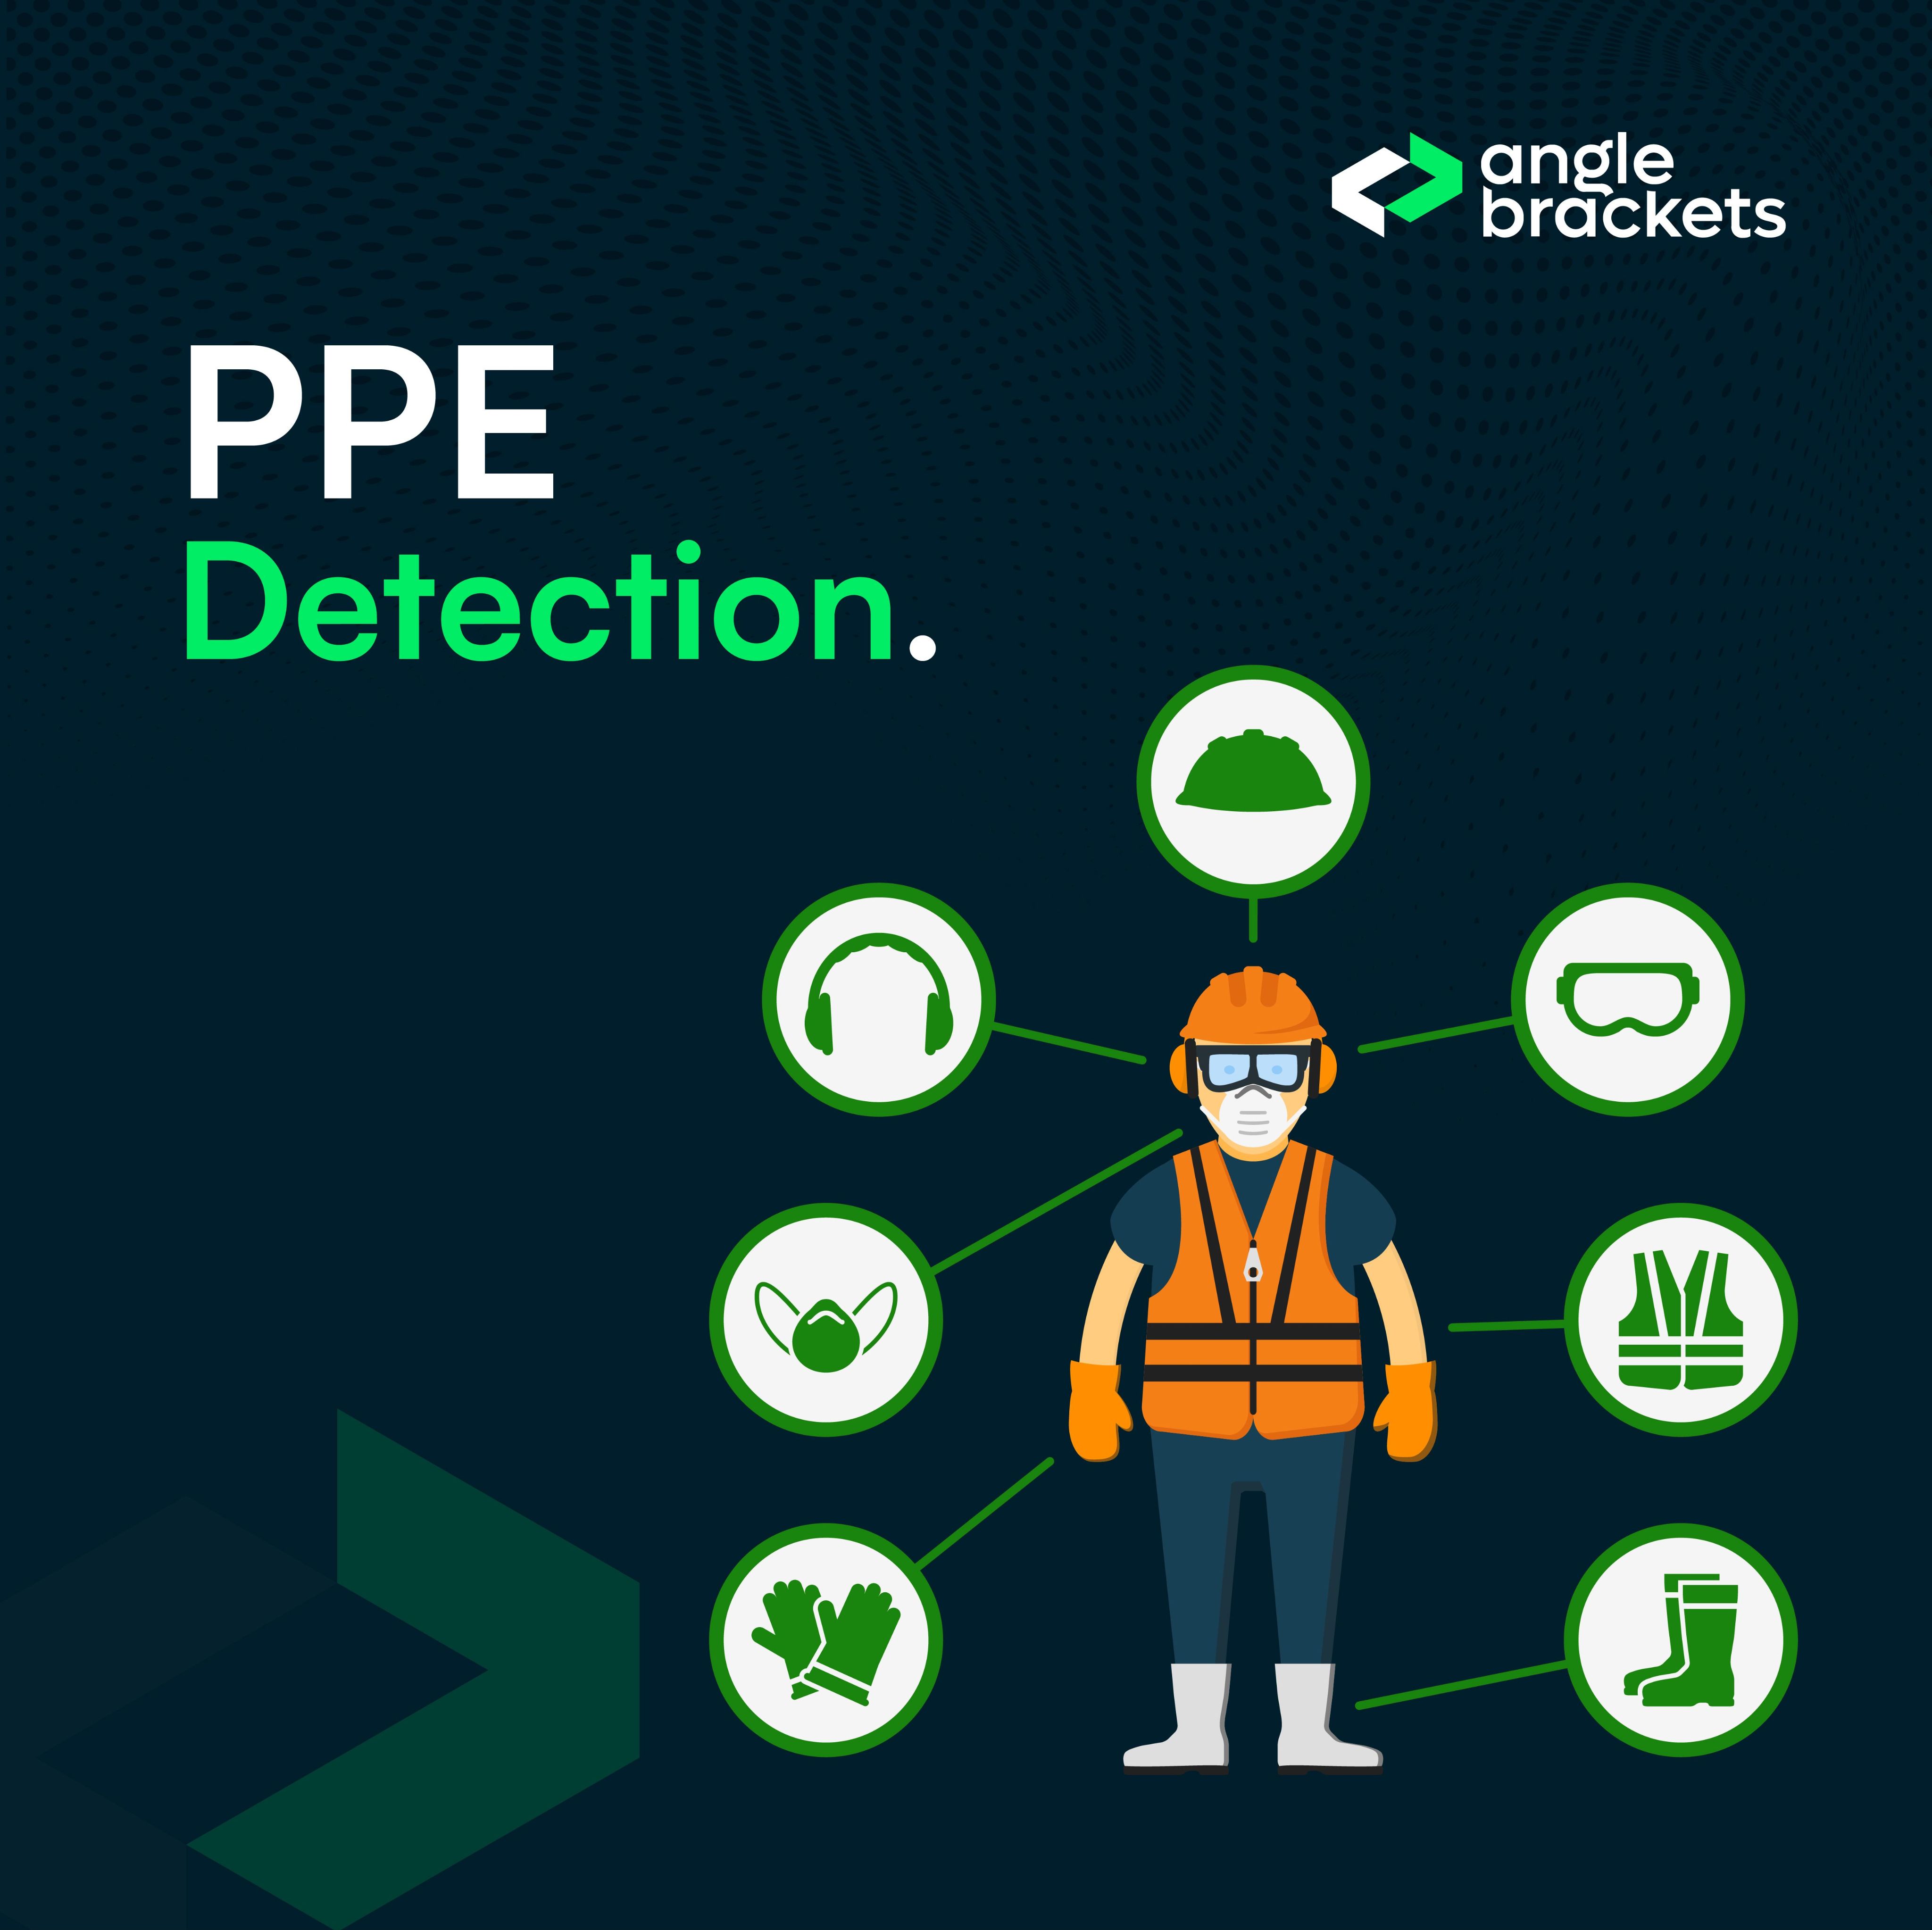 PPE detection system